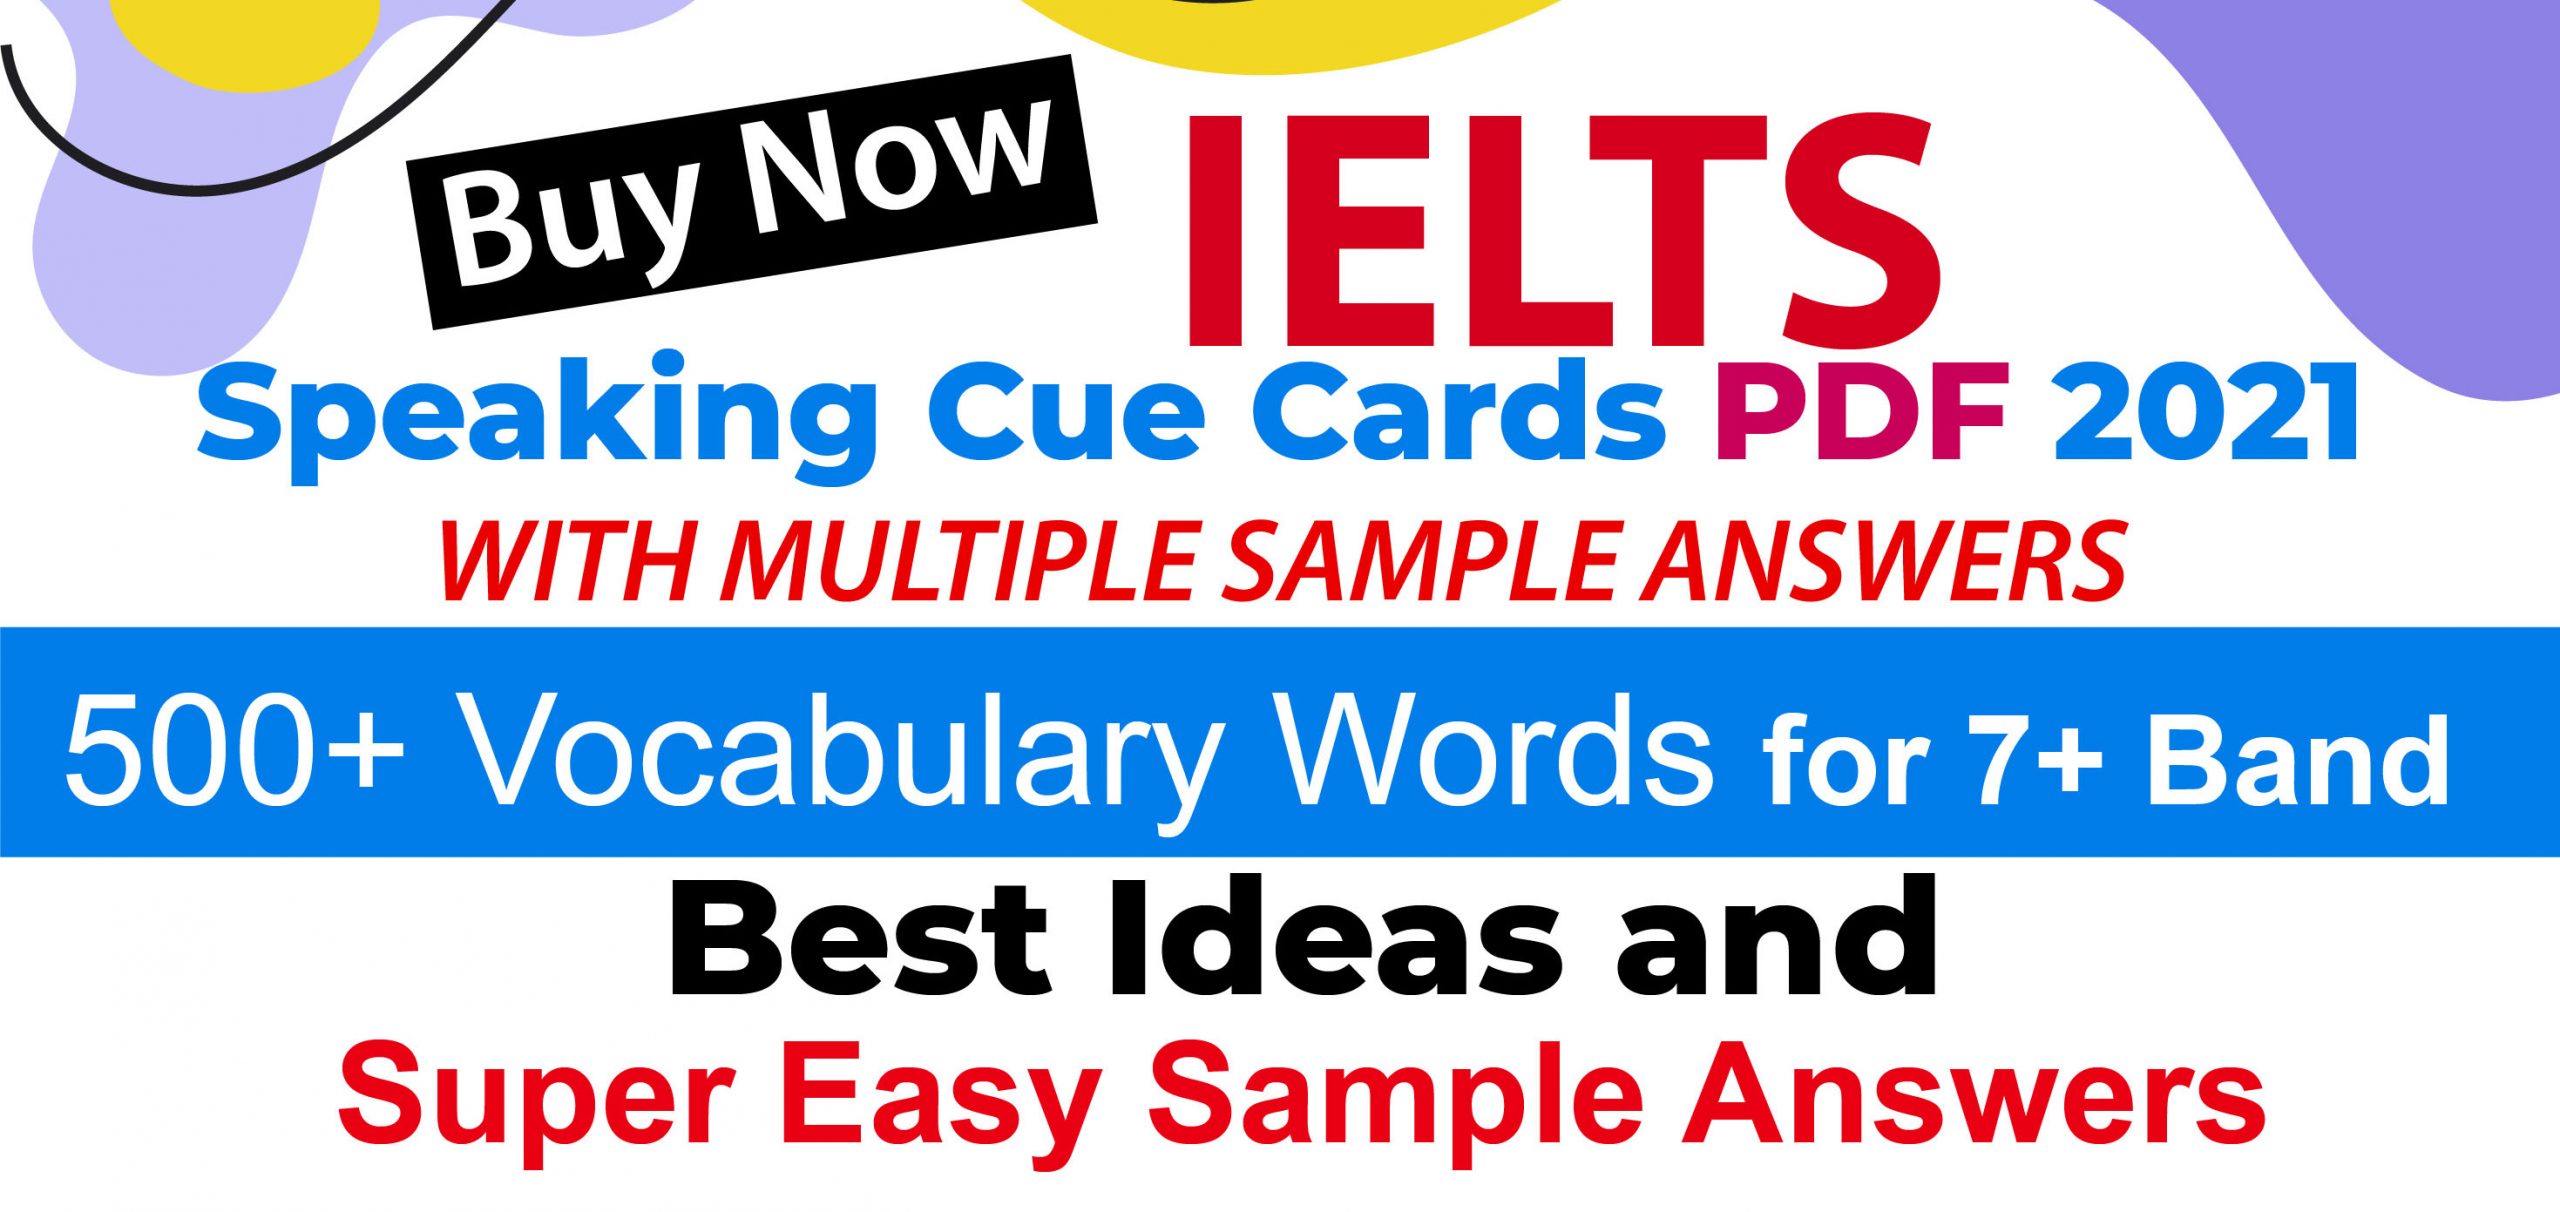 IELTS Speaking Cue Cards with sample answers 2021